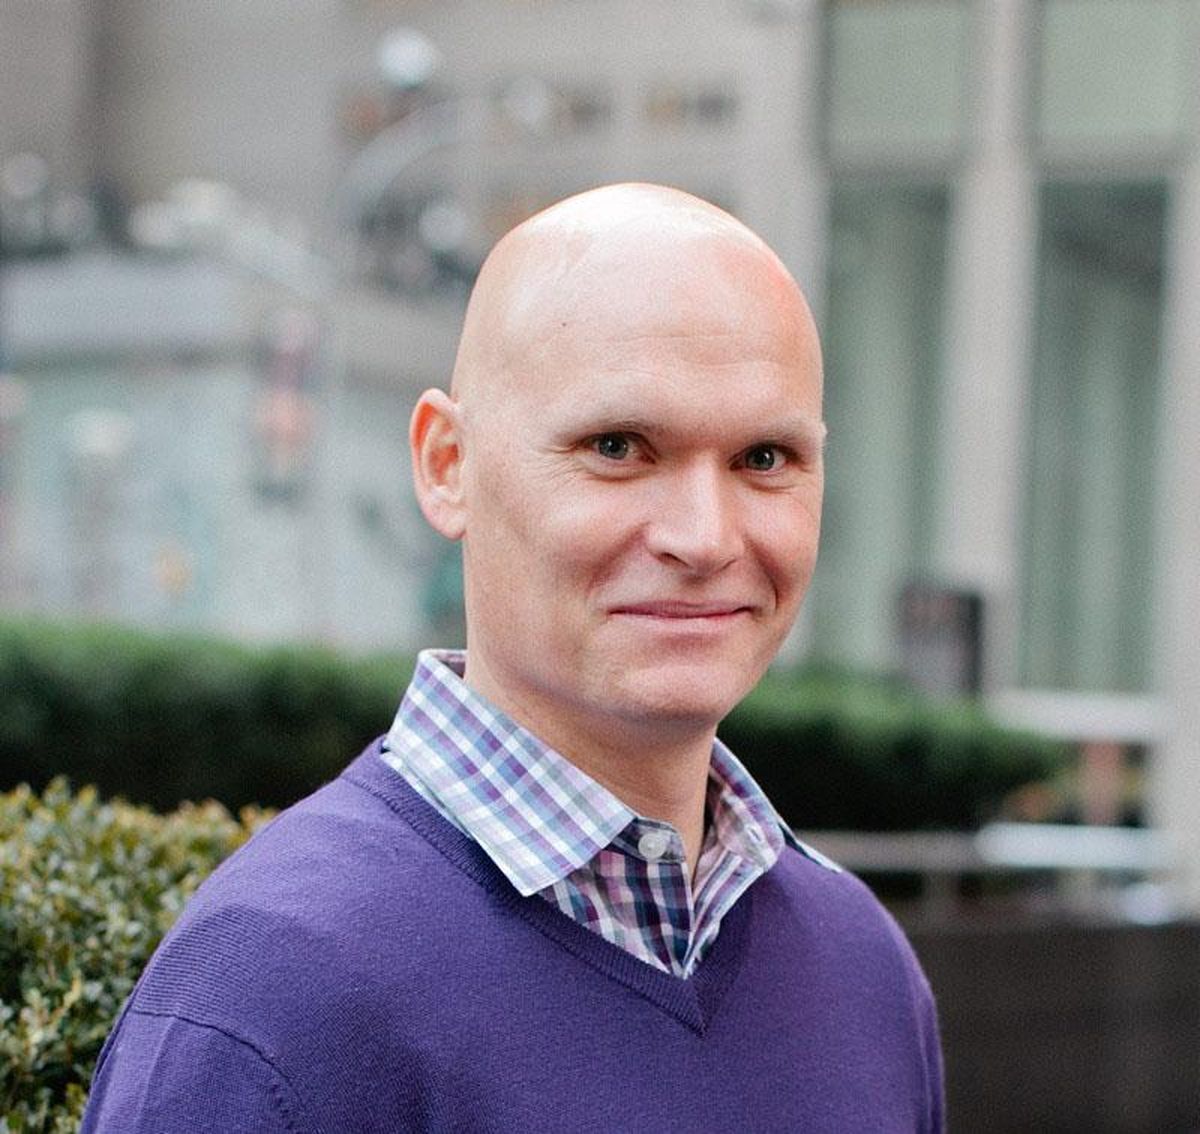 Previous headliners at Get Lit have included Anthony Doerr (pictured), Joyce Carol Oates, Marilynne Robinson and Timothy Egan. (COURTESY PHOTO / COURTESY PHOTO)